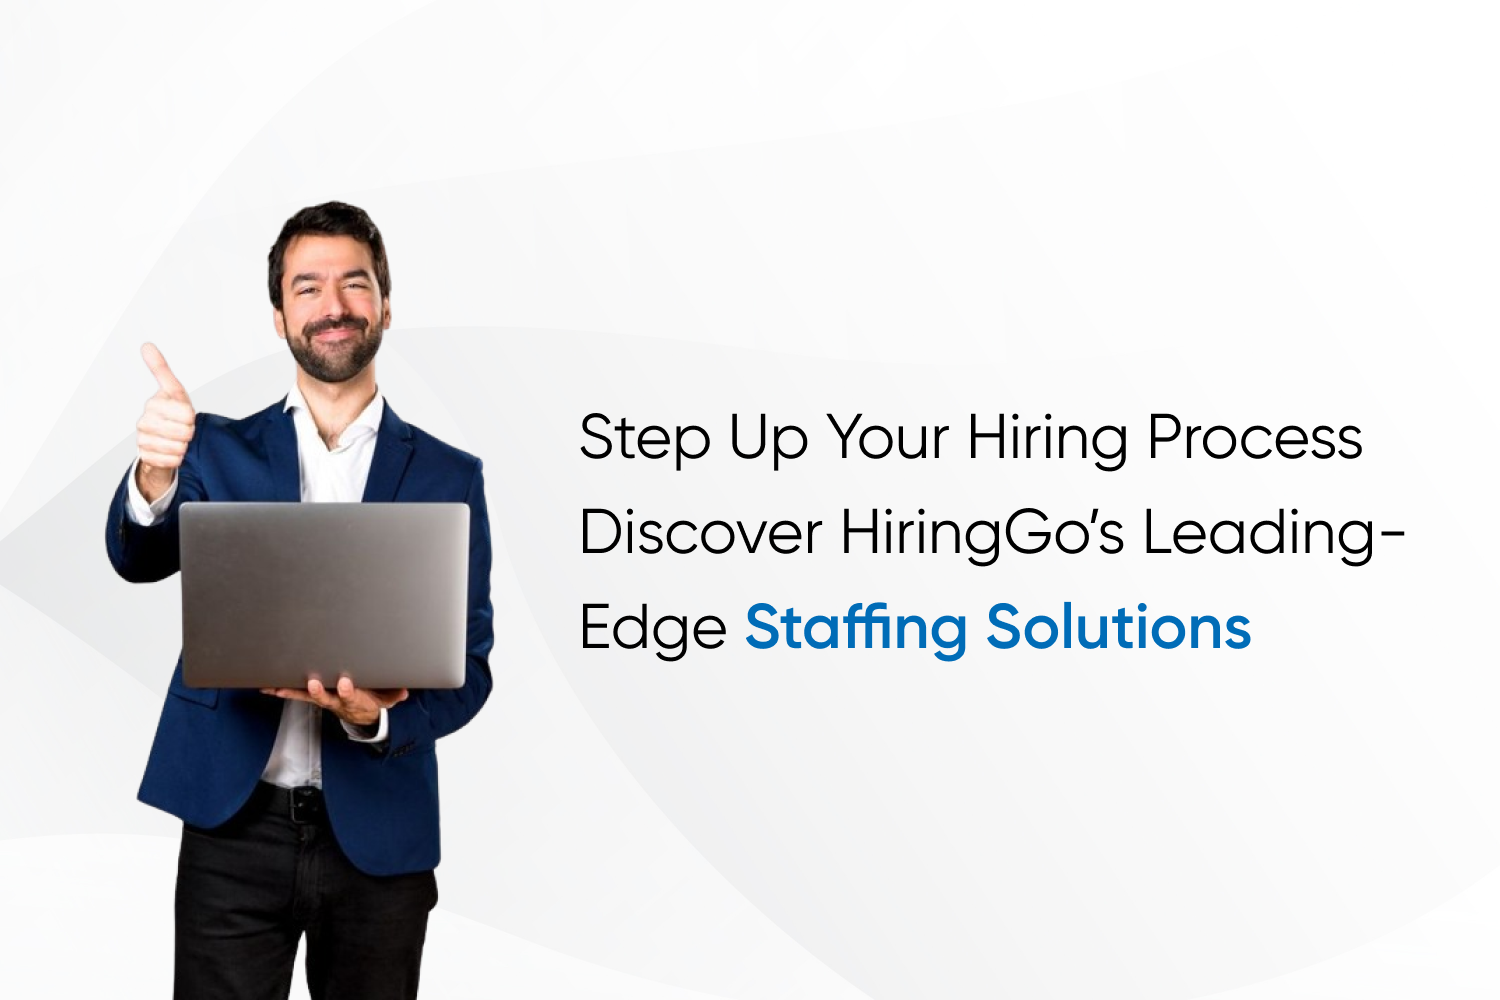 Step Up Your Hiring Process Discover HiringGo’s Leading-Edge Staffing Solutions